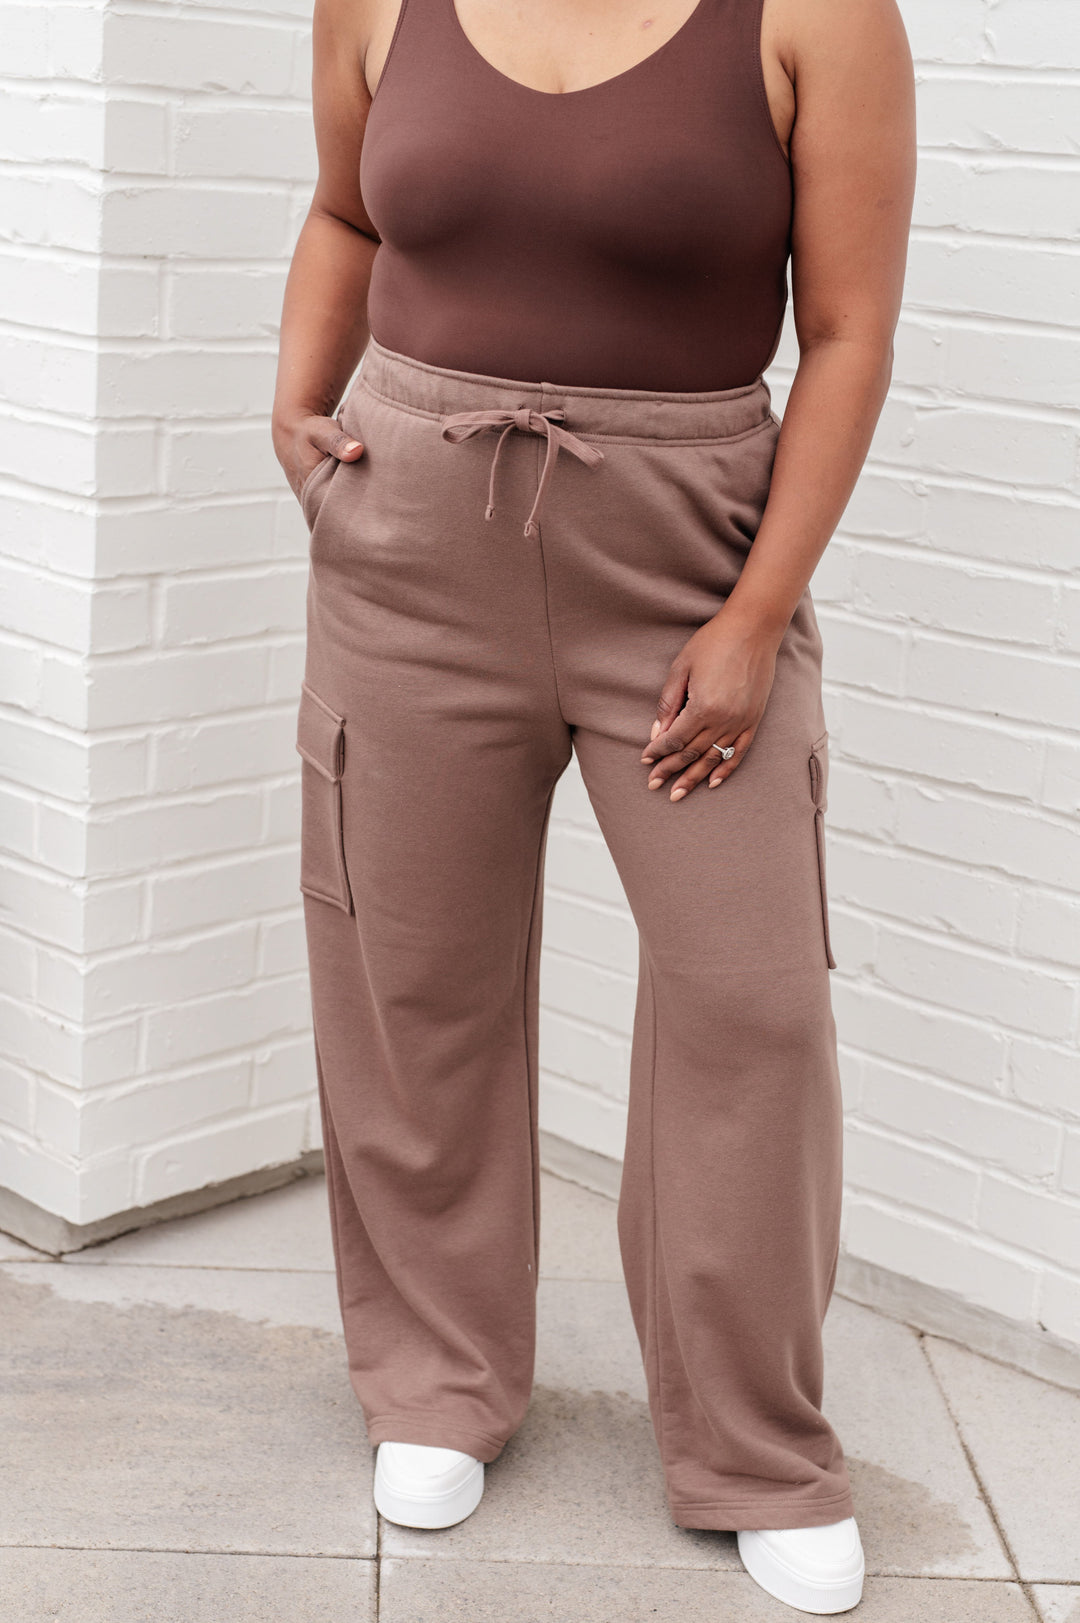 Run, Don't Walk Cargo Sweatpants in Smokey Brown-Athleisure-Inspired by Justeen-Women's Clothing Boutique in Chicago, Illinois